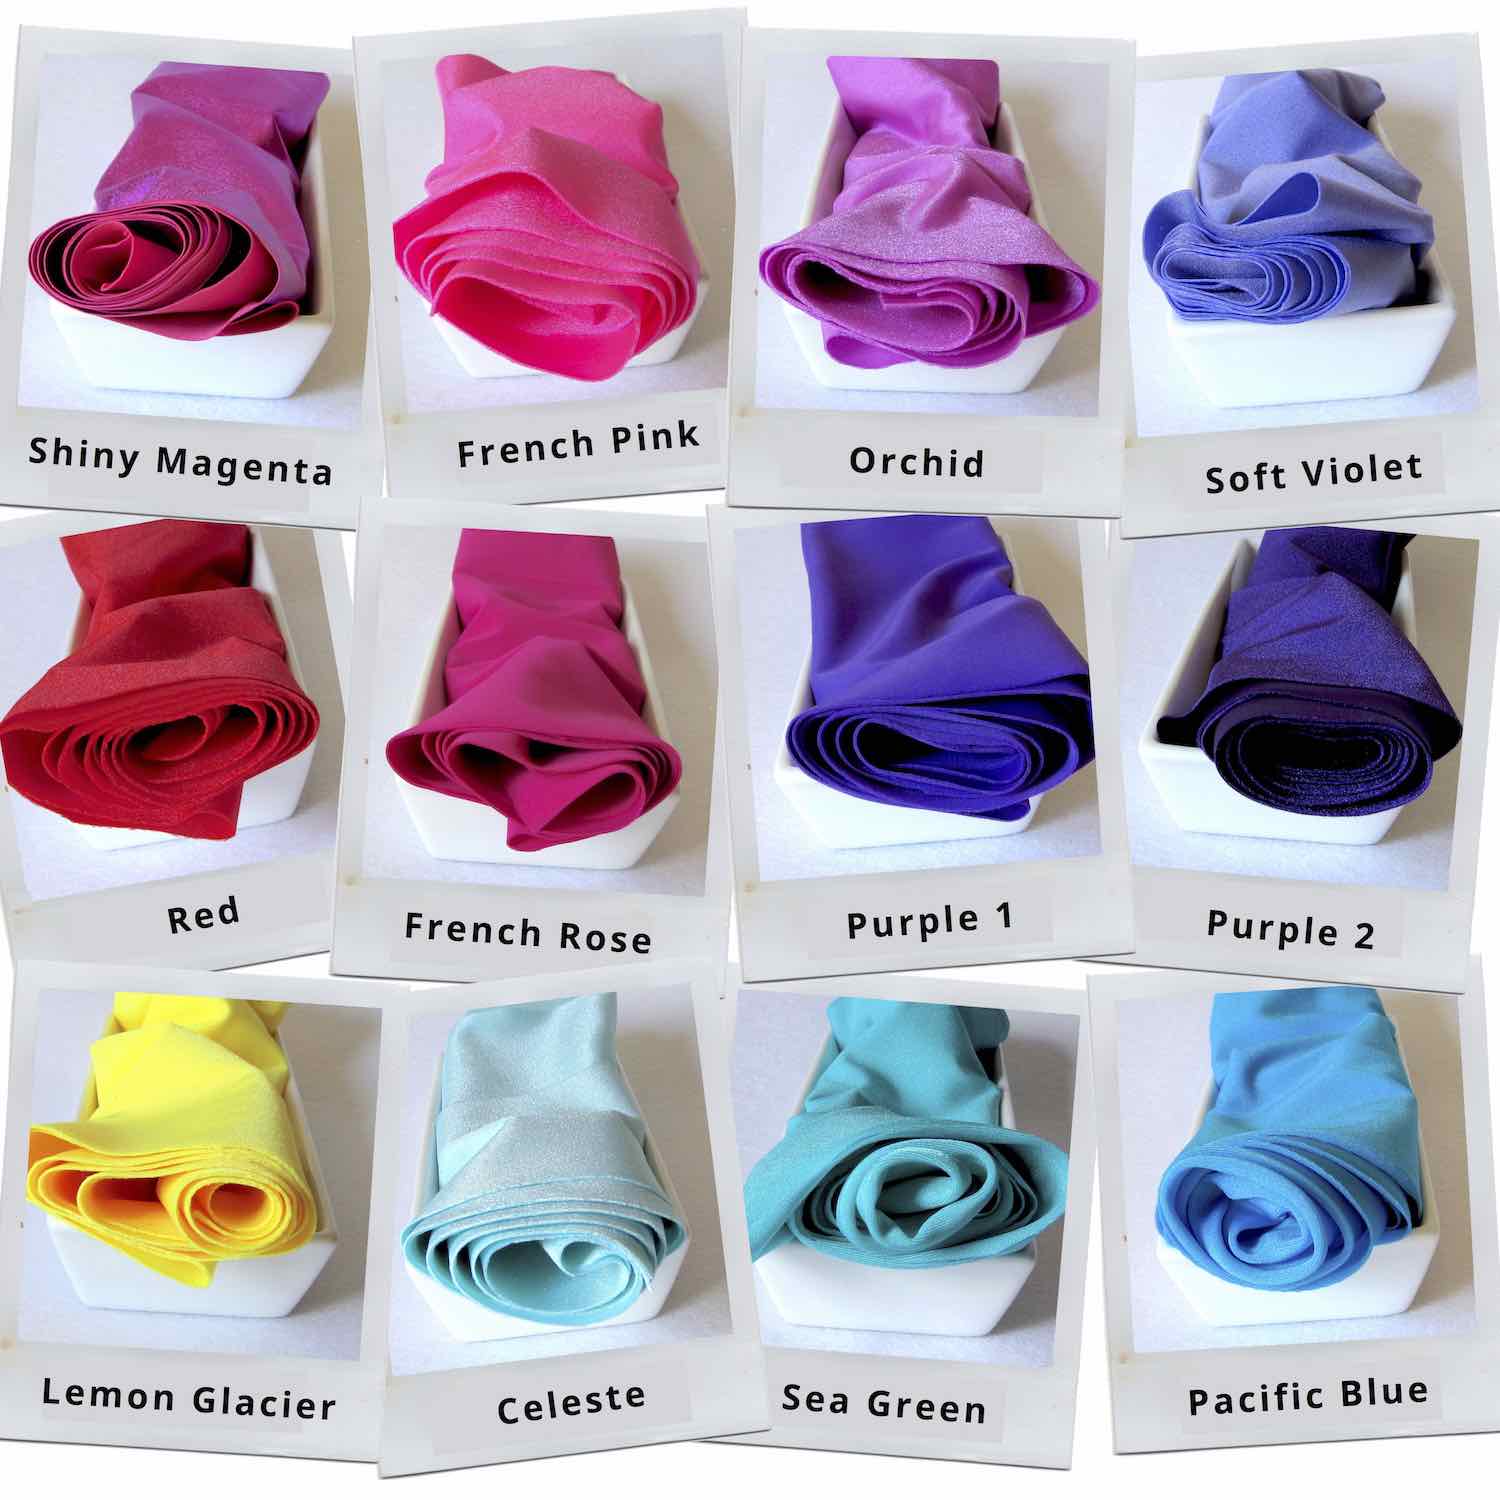 Fabric selection for soft and stylish limited edition Posh Me Fab boa scarves. Showing fabric colors of version Hullabaloo.